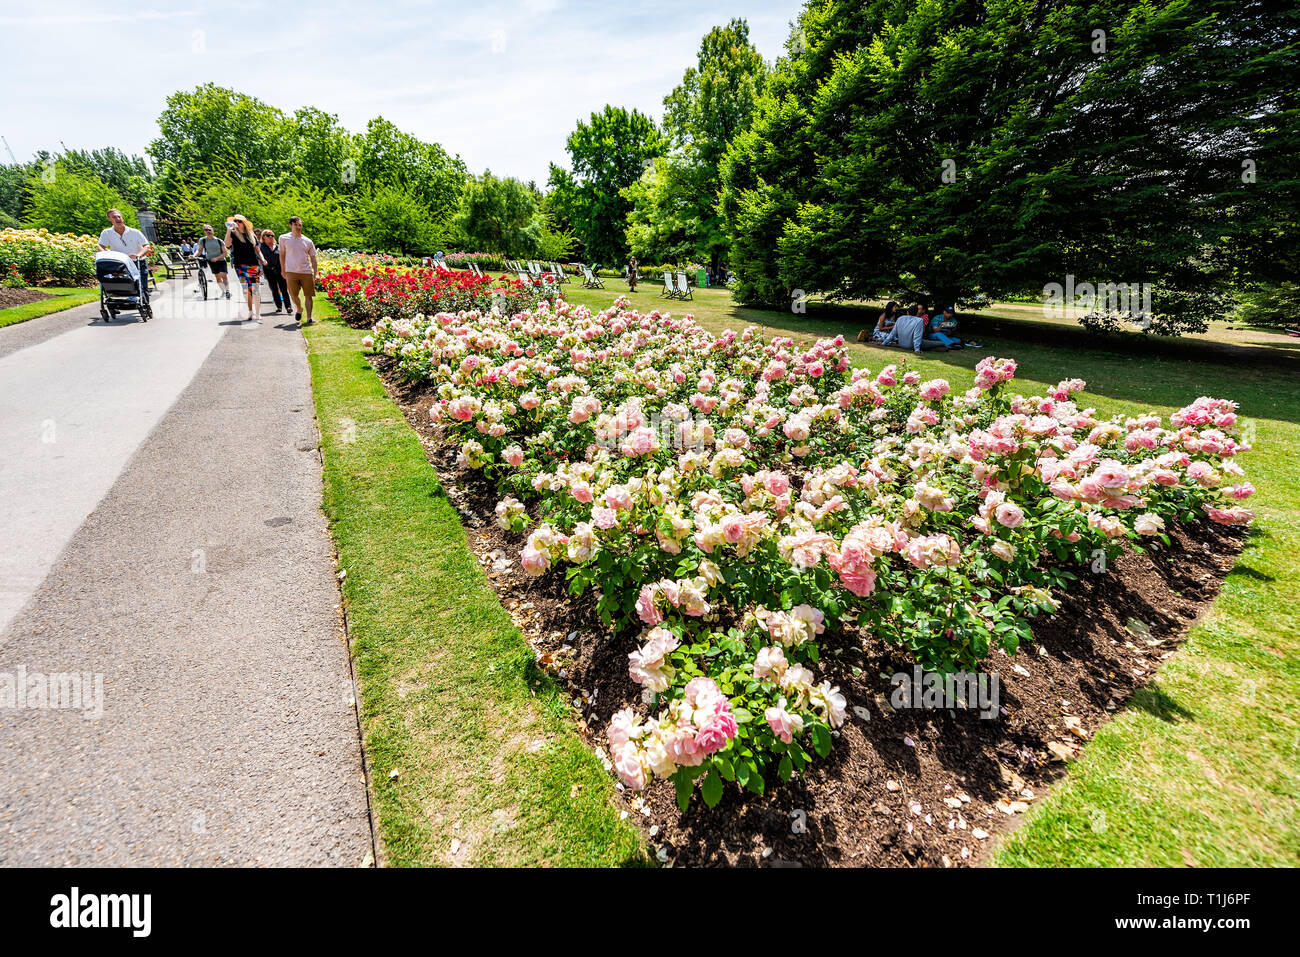 London, UK - June 24, 2018: Queen Mary's Rose Gardens in Regent's park during summer day with trail street road path and people colorful flowers Stock Photo